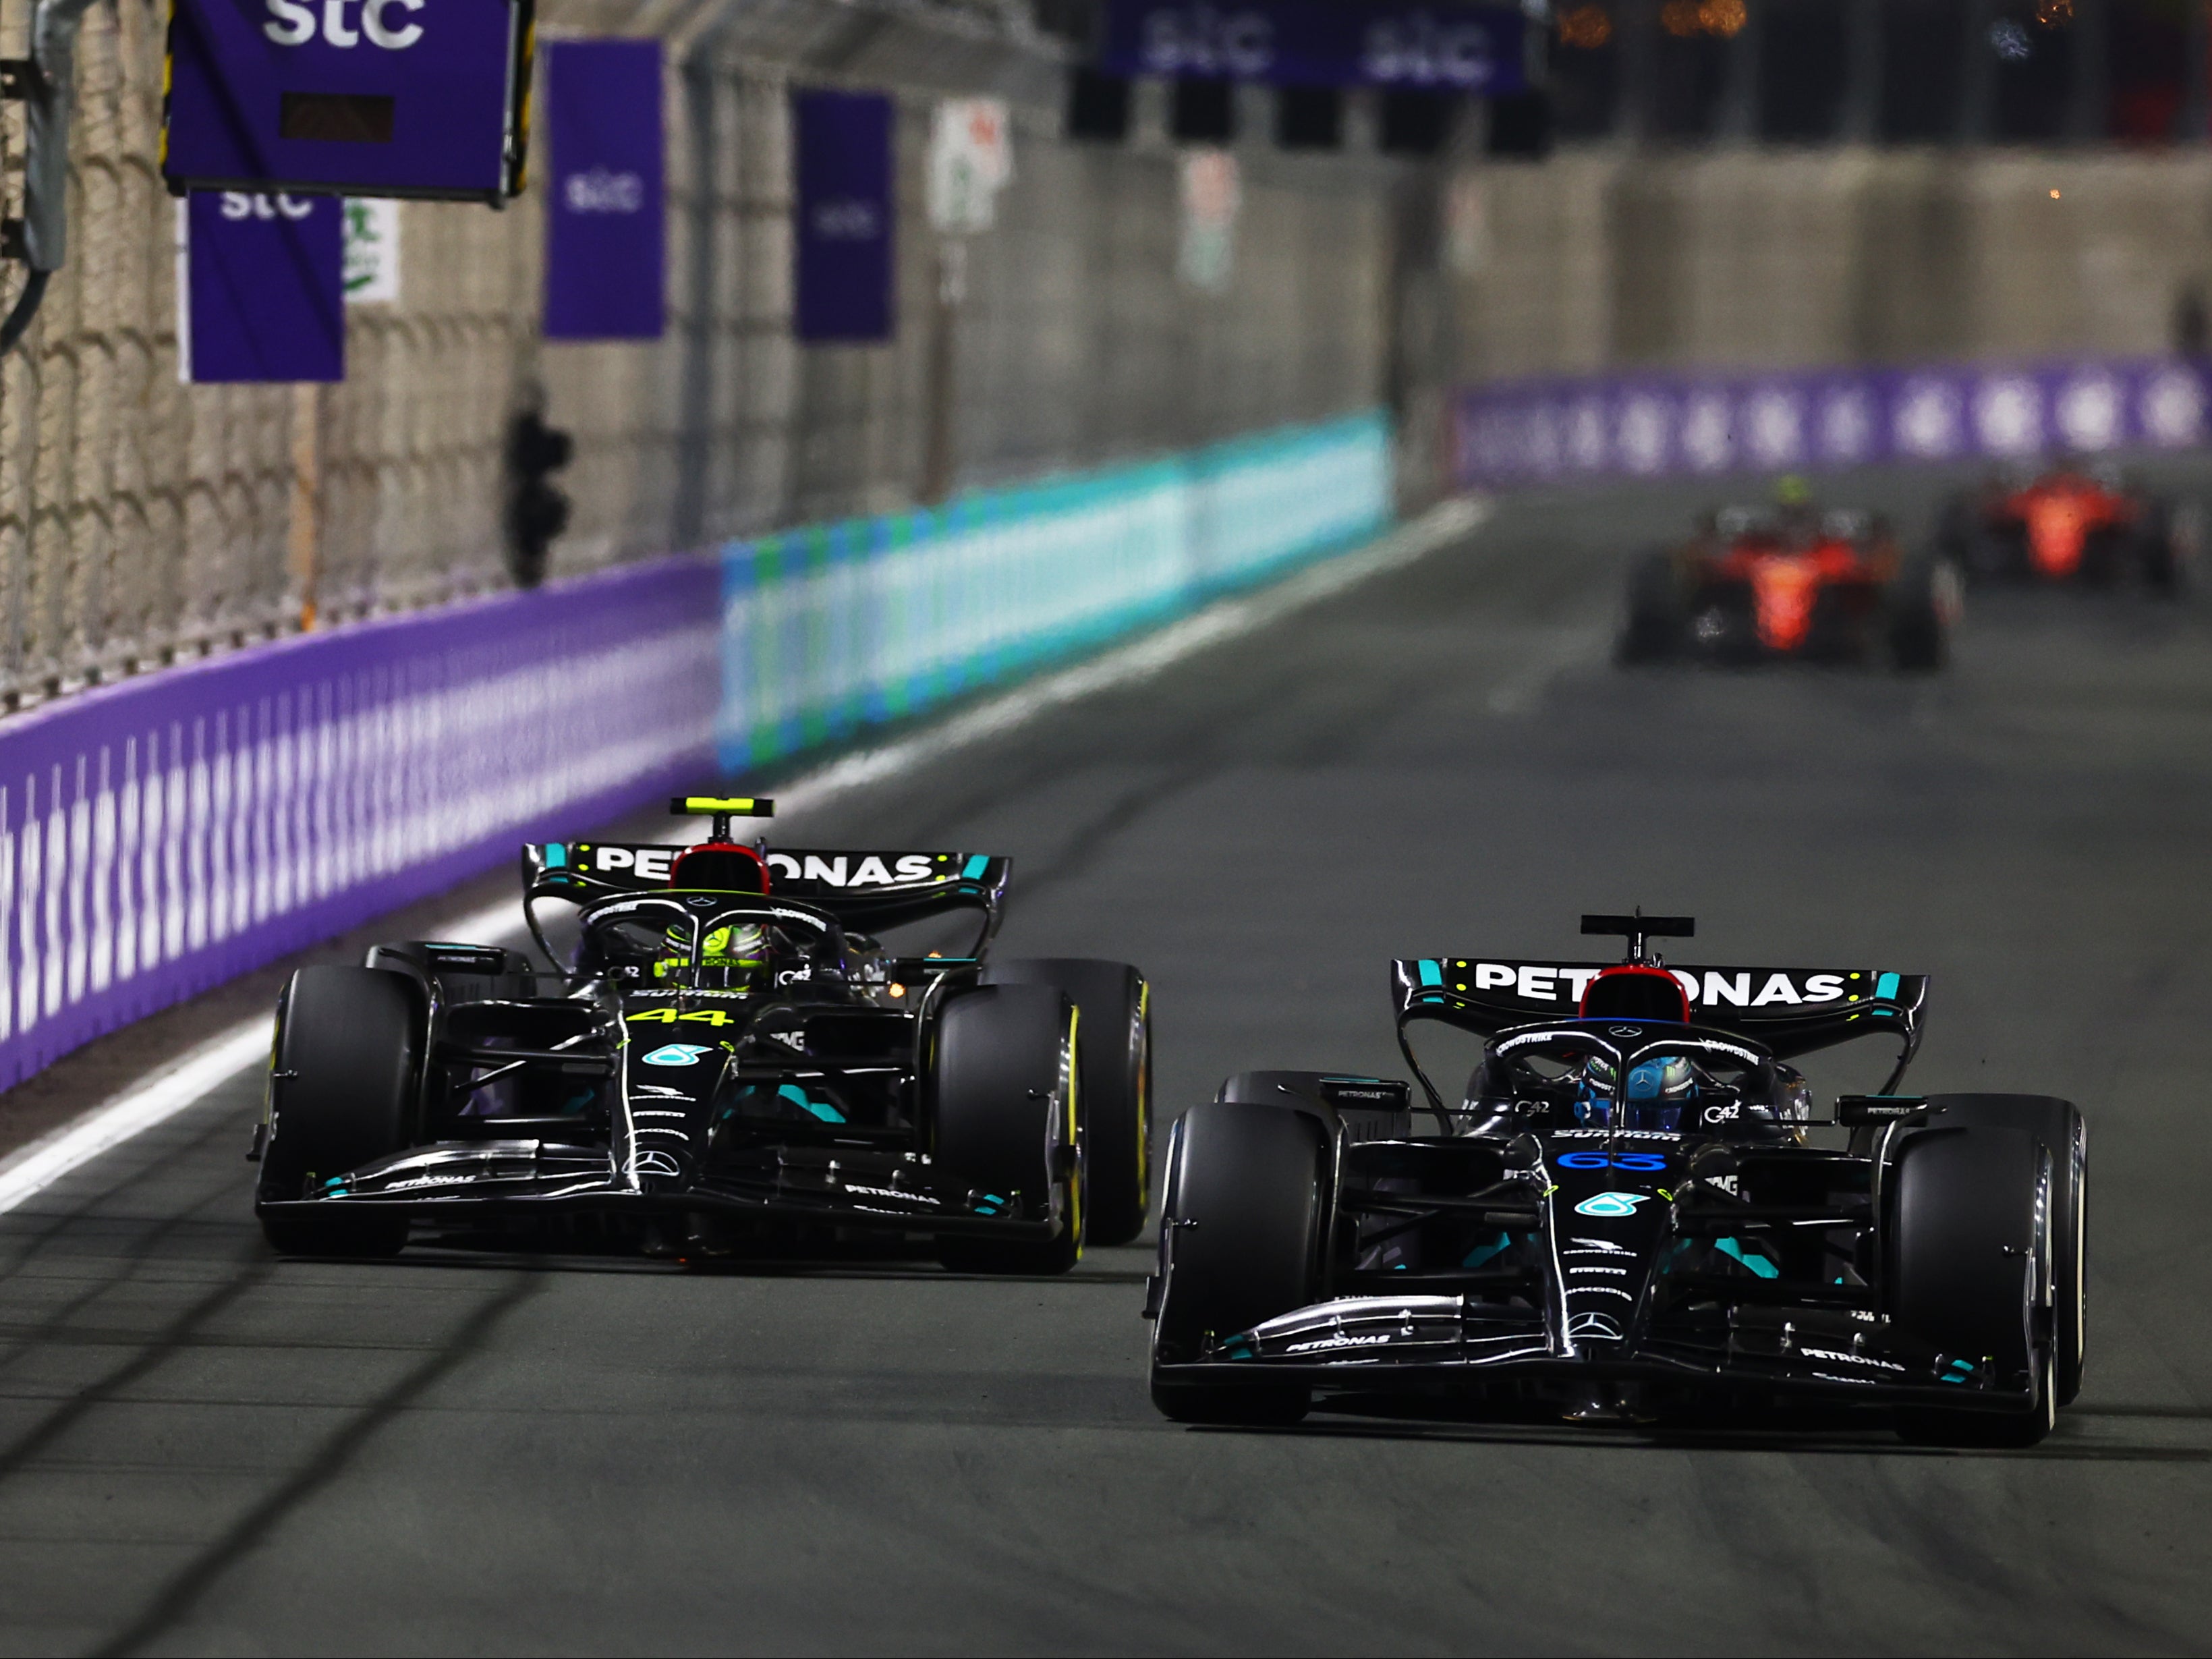 George Russell (right) finished ahead of teammate Lewis Hamilton in Saudi Arabia